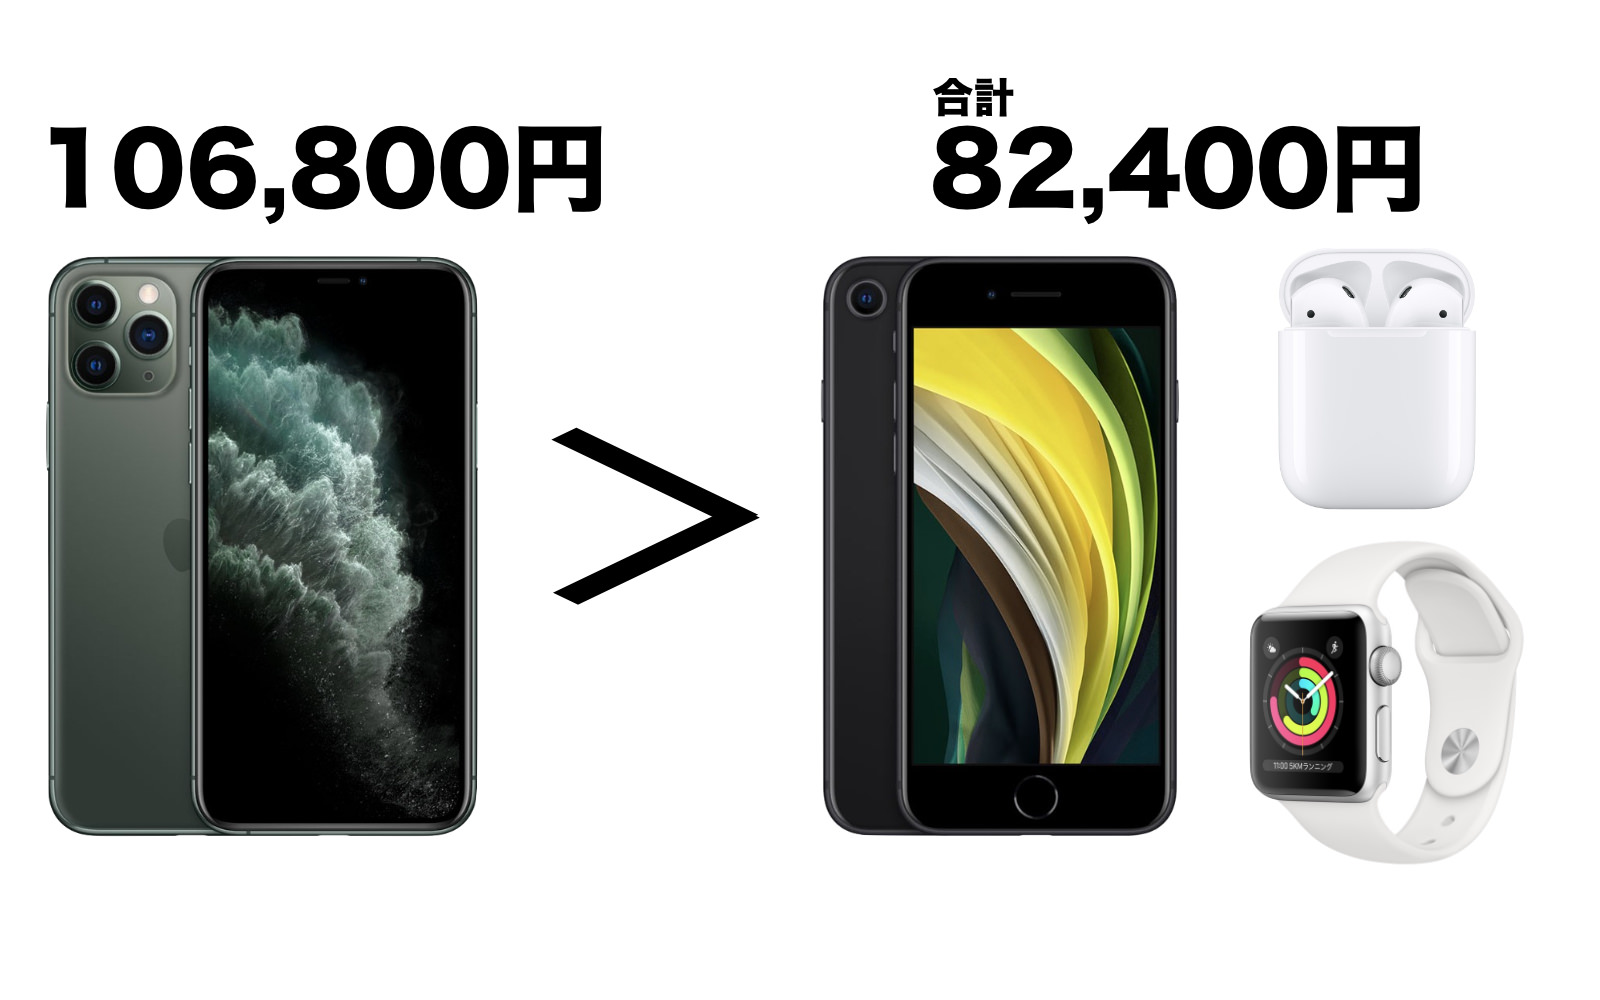 iphone11pro-pricing-vs-iphonese-and-others.jpg